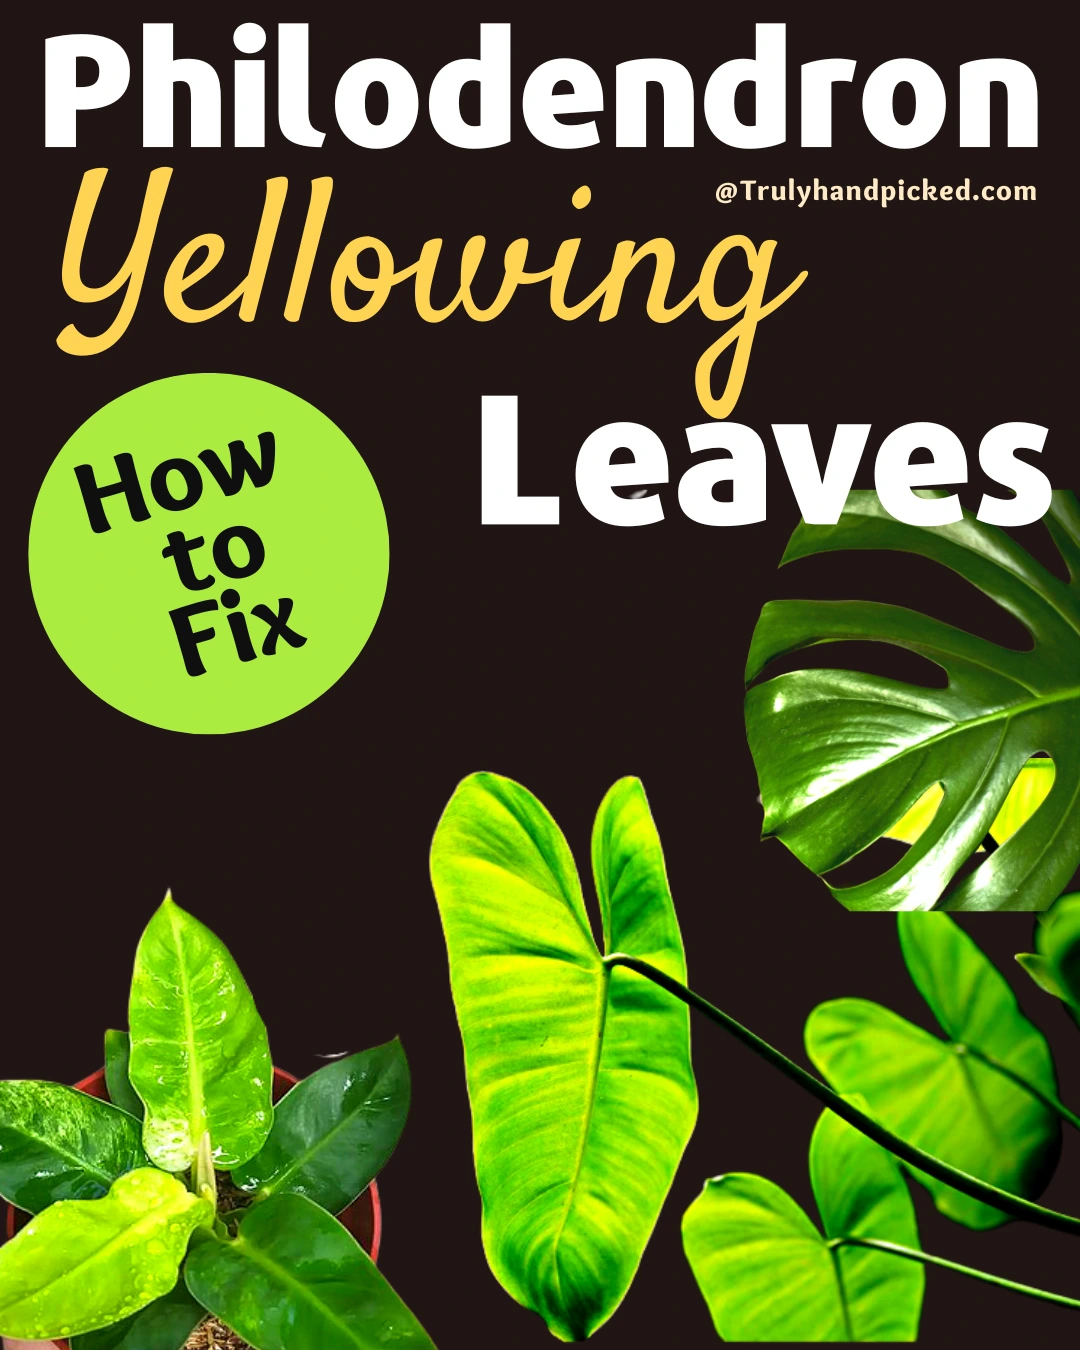 Why My Philodendron Plant Leaves Are Turning Yellow